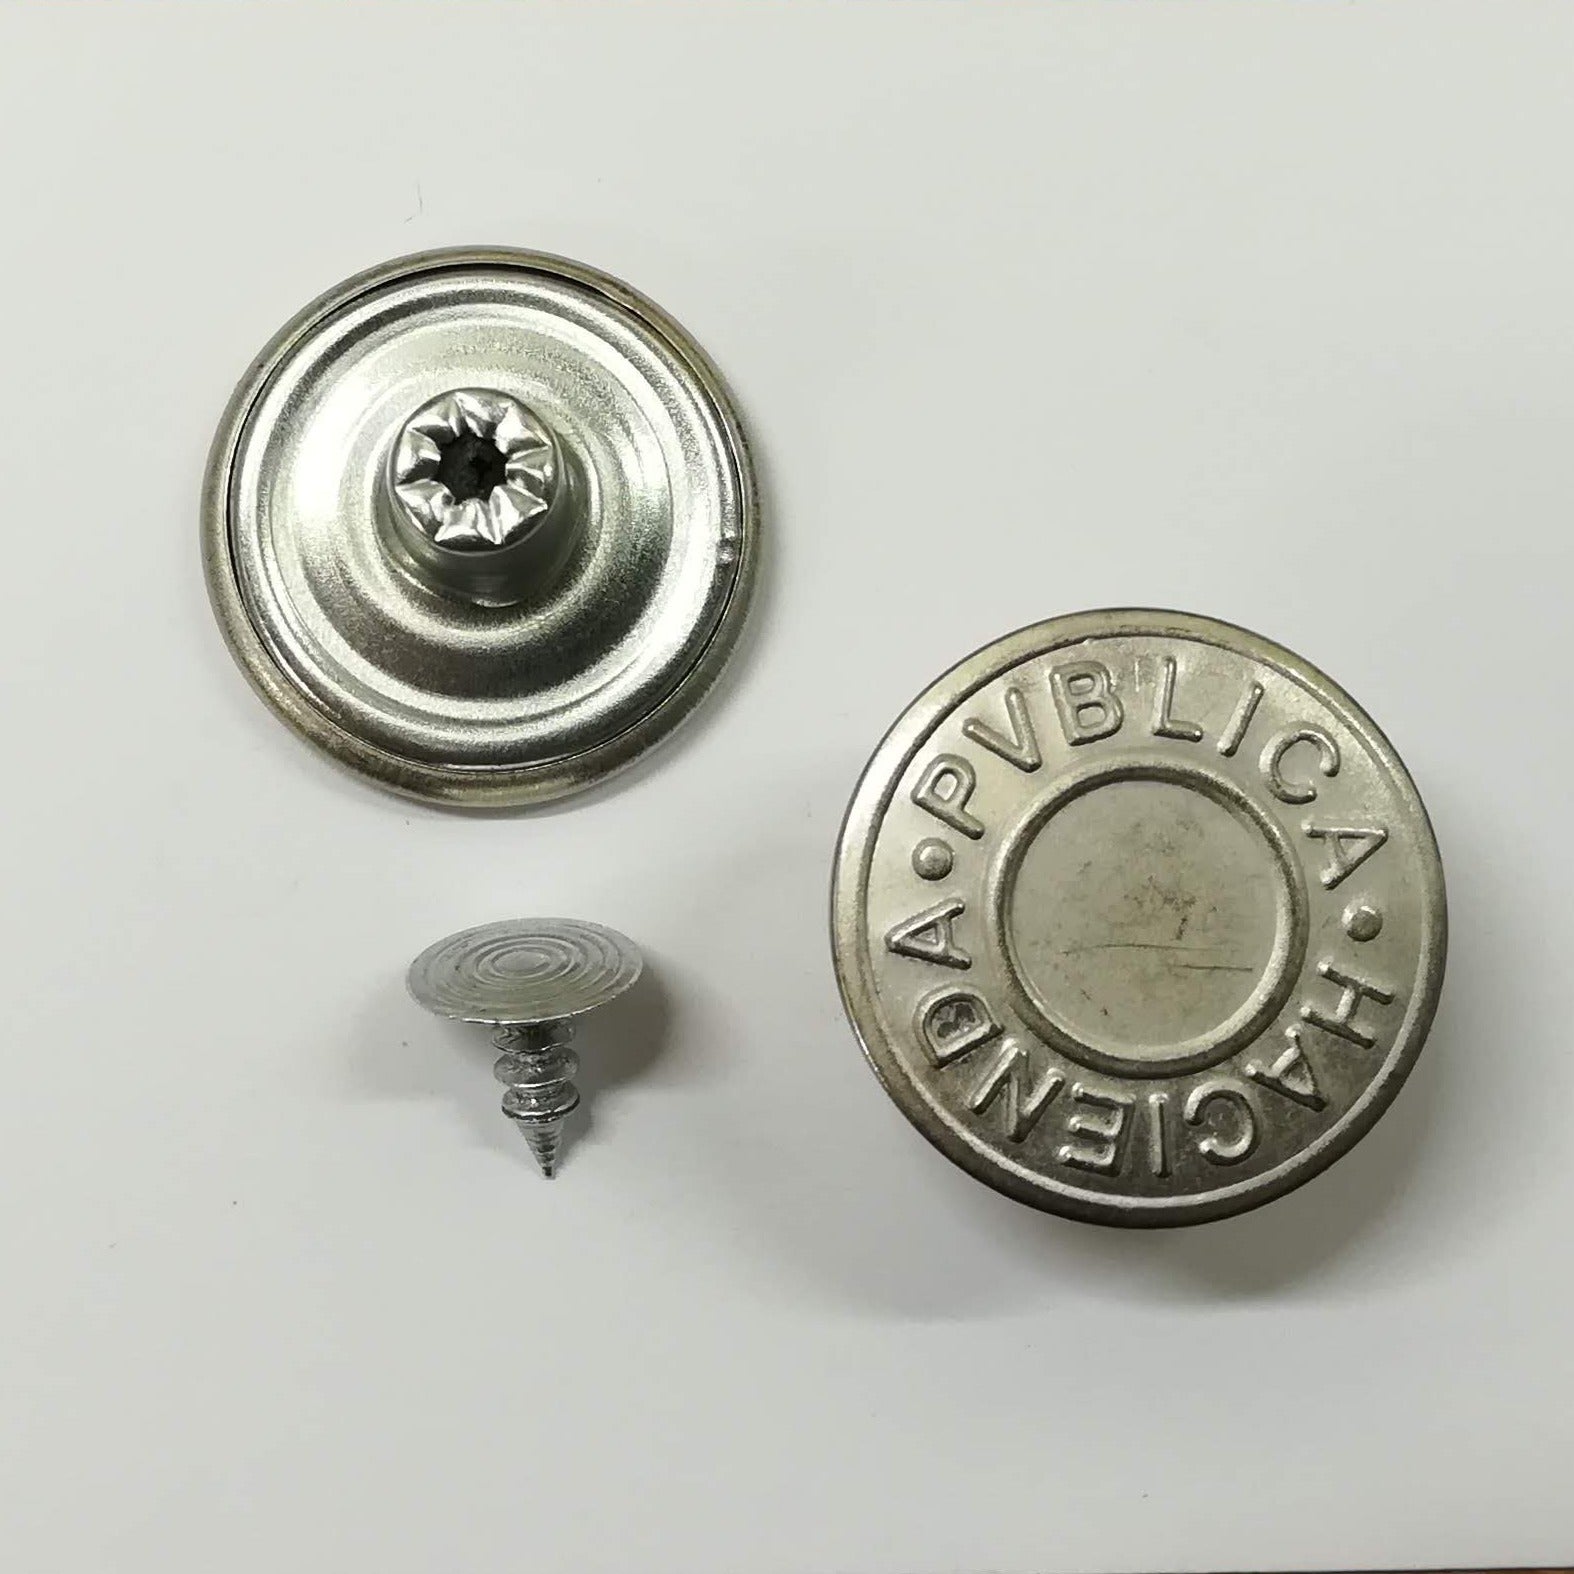 SILVER JEAN BUTTONS FLAT METAL 14mm - Nasias Buttons